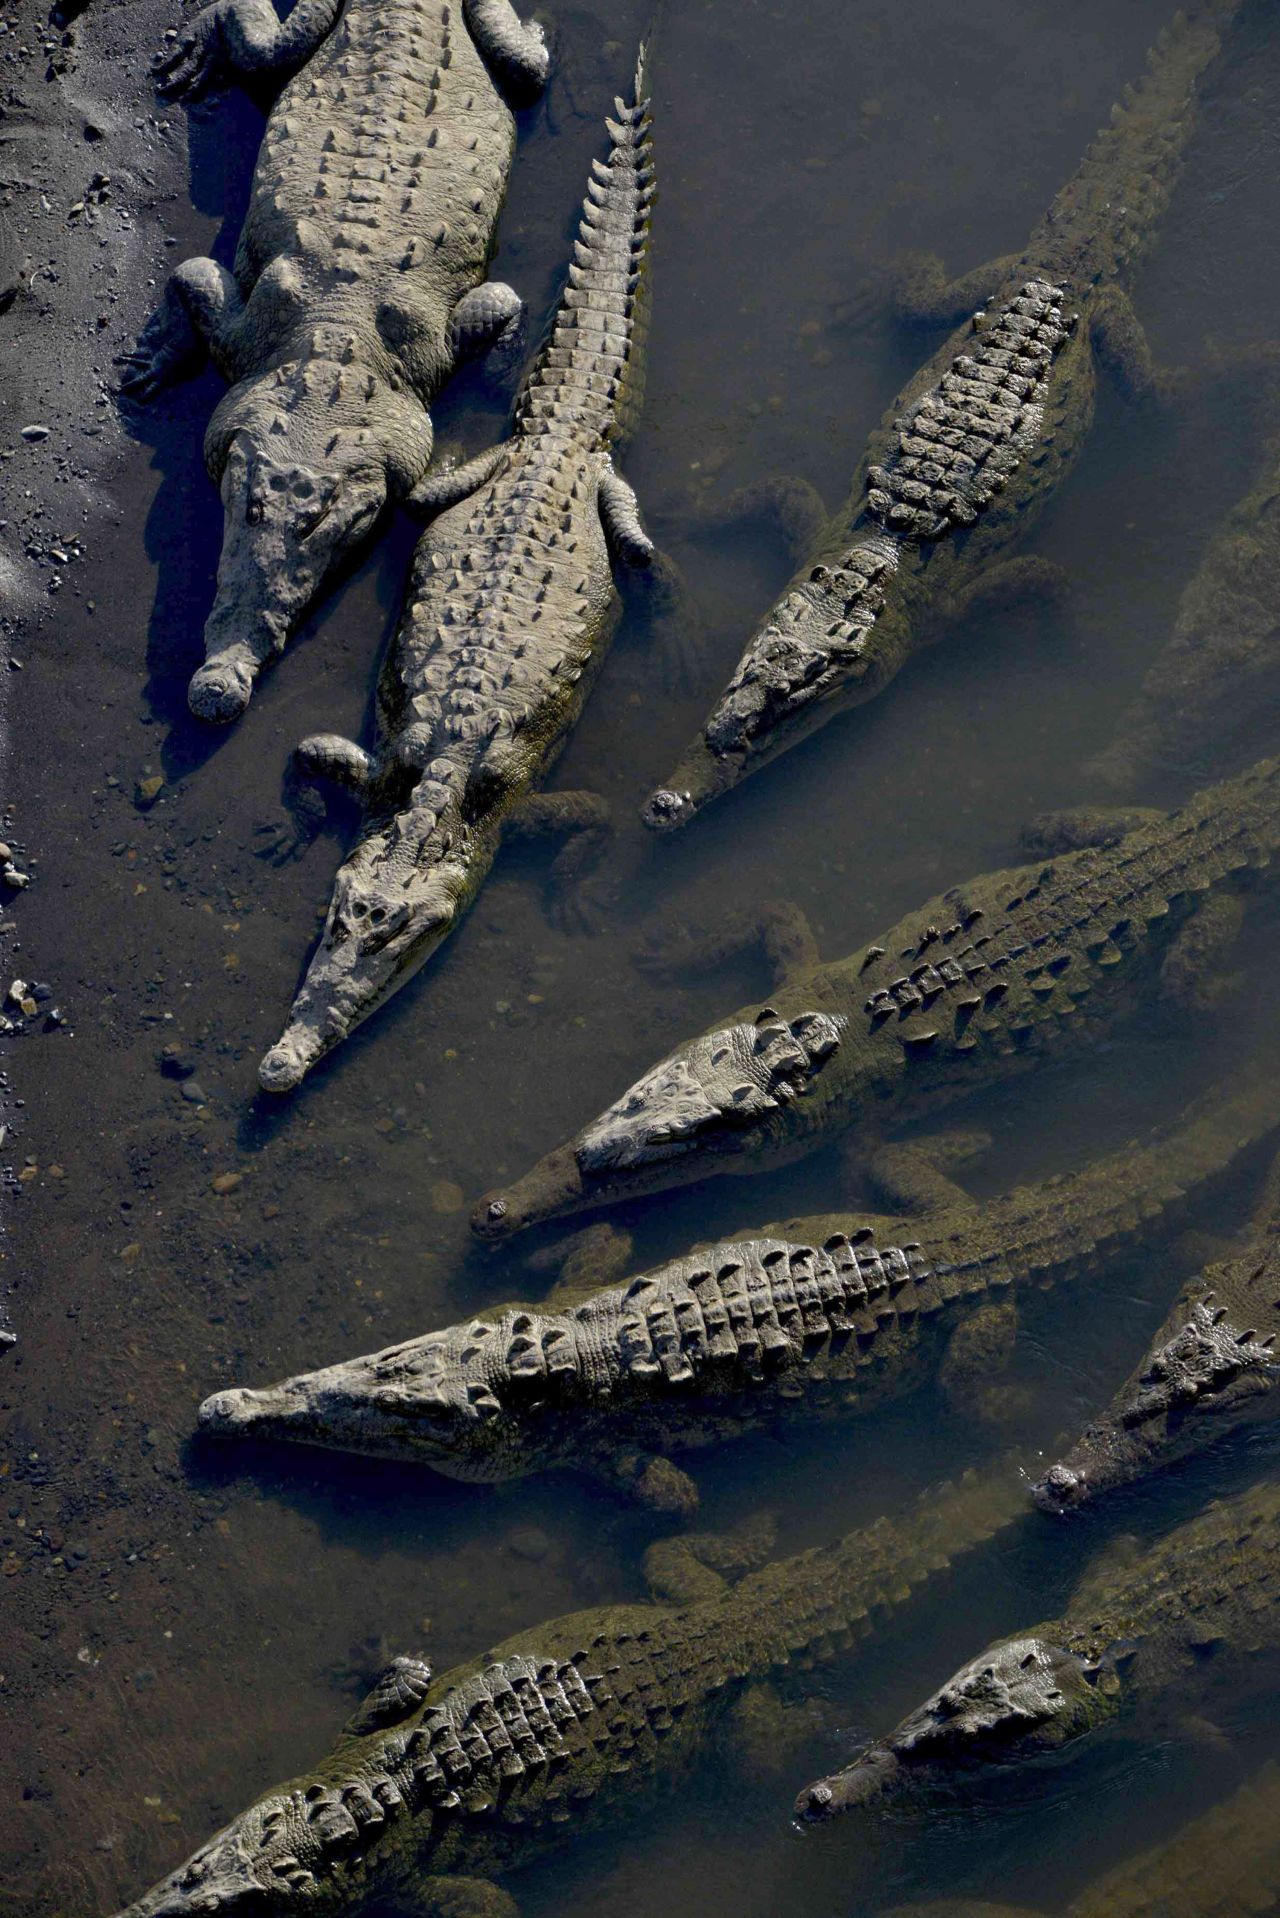 <strong>Crocodile rock: </strong>The crocs who live here can reach up to 7 meters (23 feet) long.